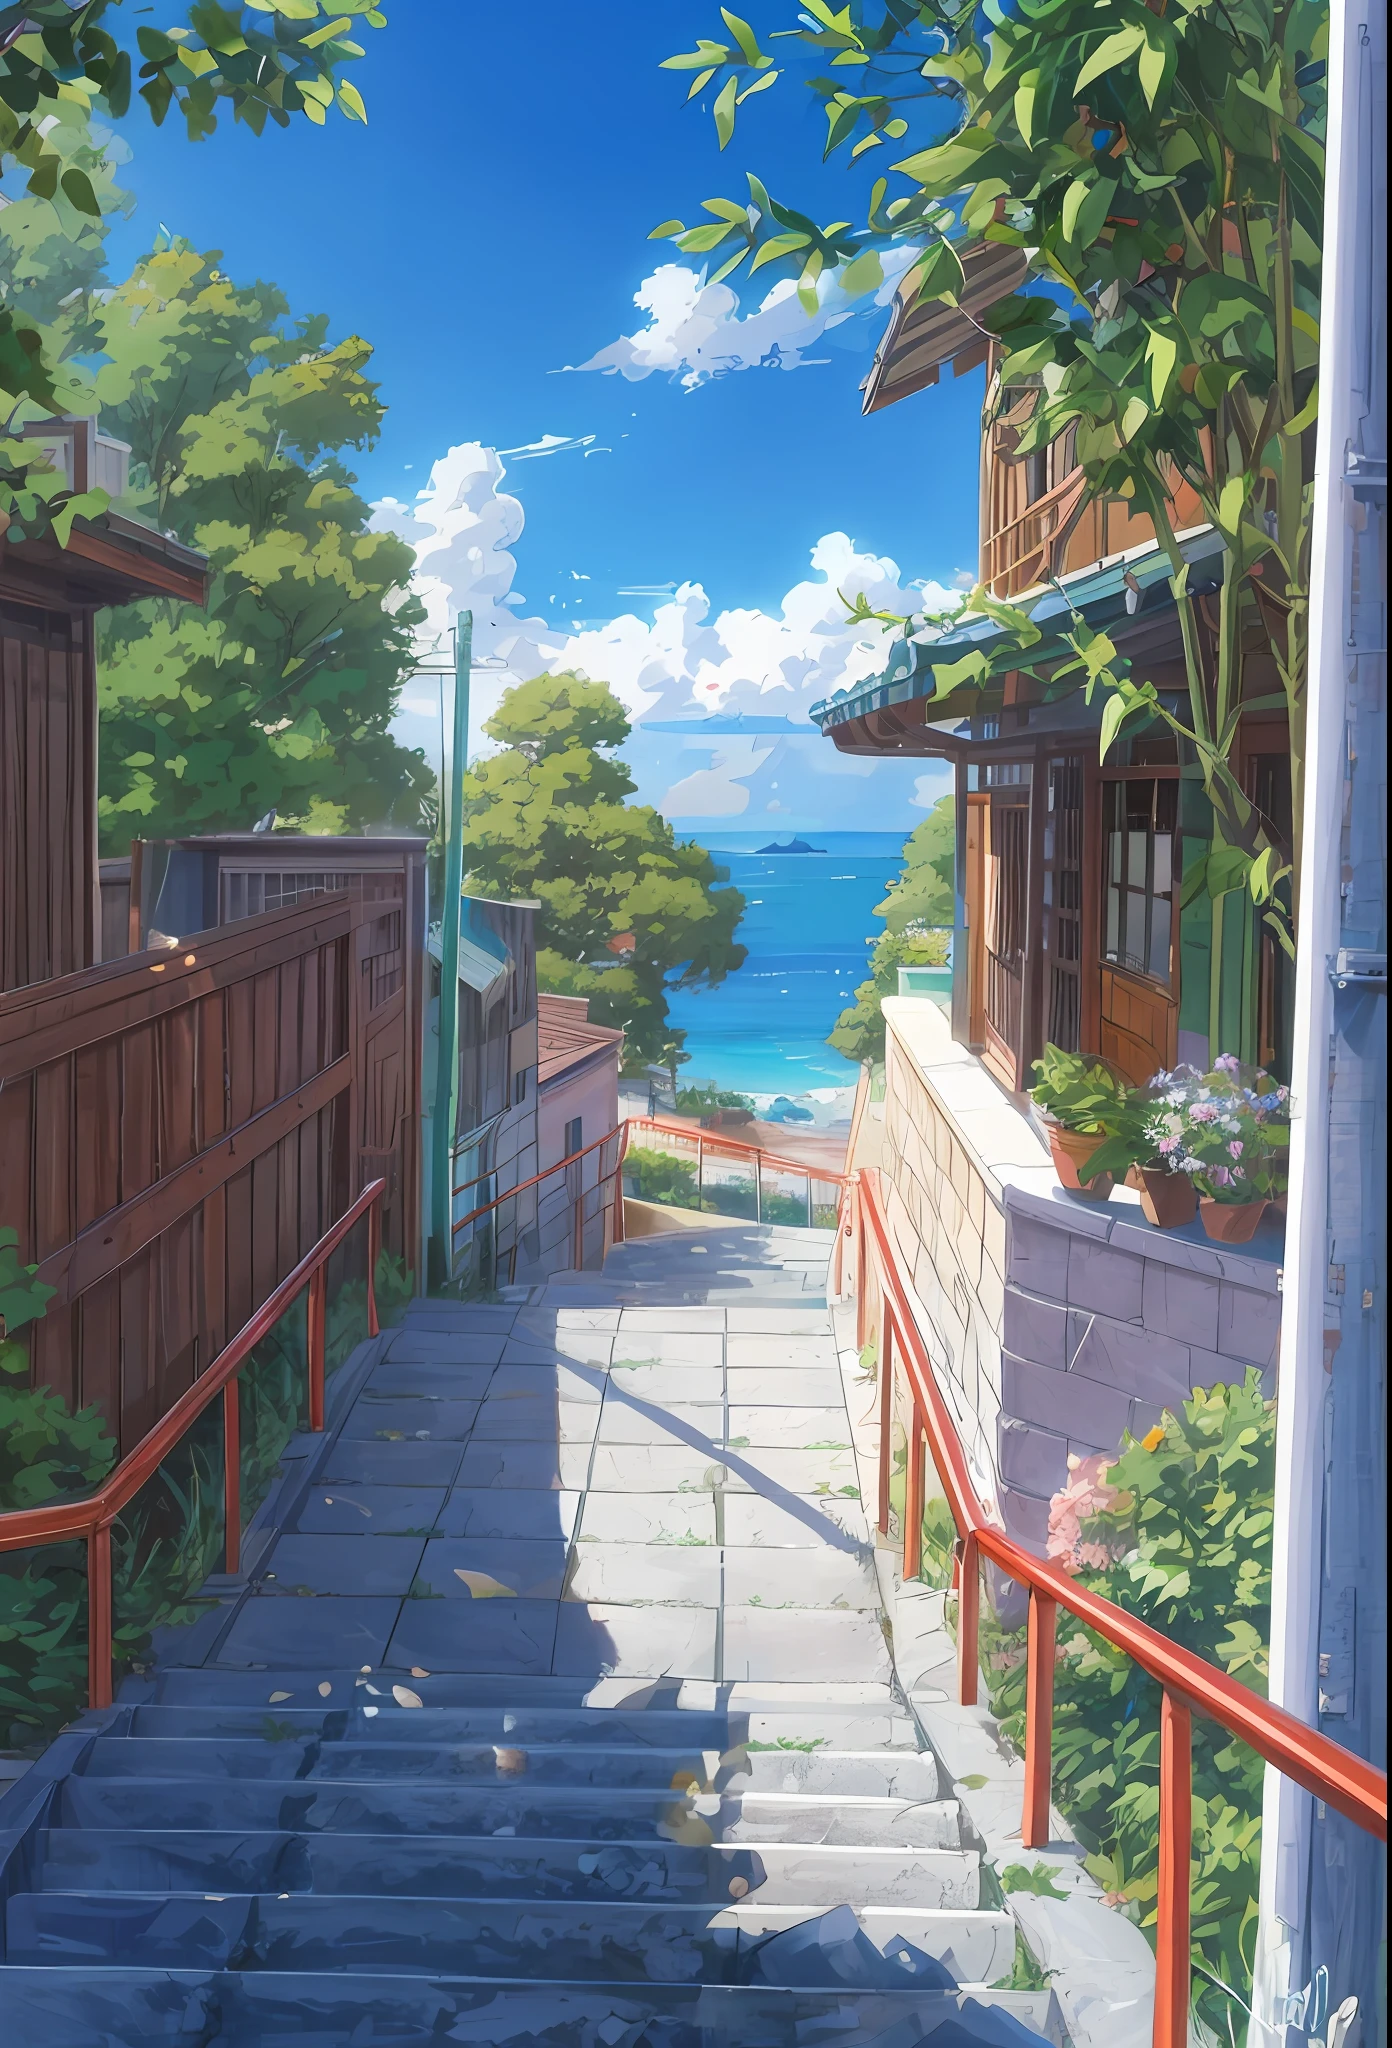 a painting of a stairway leading to a house with a view of the ocean, beautiful anime scenery, anime background art, detailed scenery —width 672, beautiful anime scene, anime scenery, anime beautiful peace scene, summer street near a beach, anime background, style of makoto shinkai, makoto shinkai. high detail, anime scenery concept art, scenery artwork